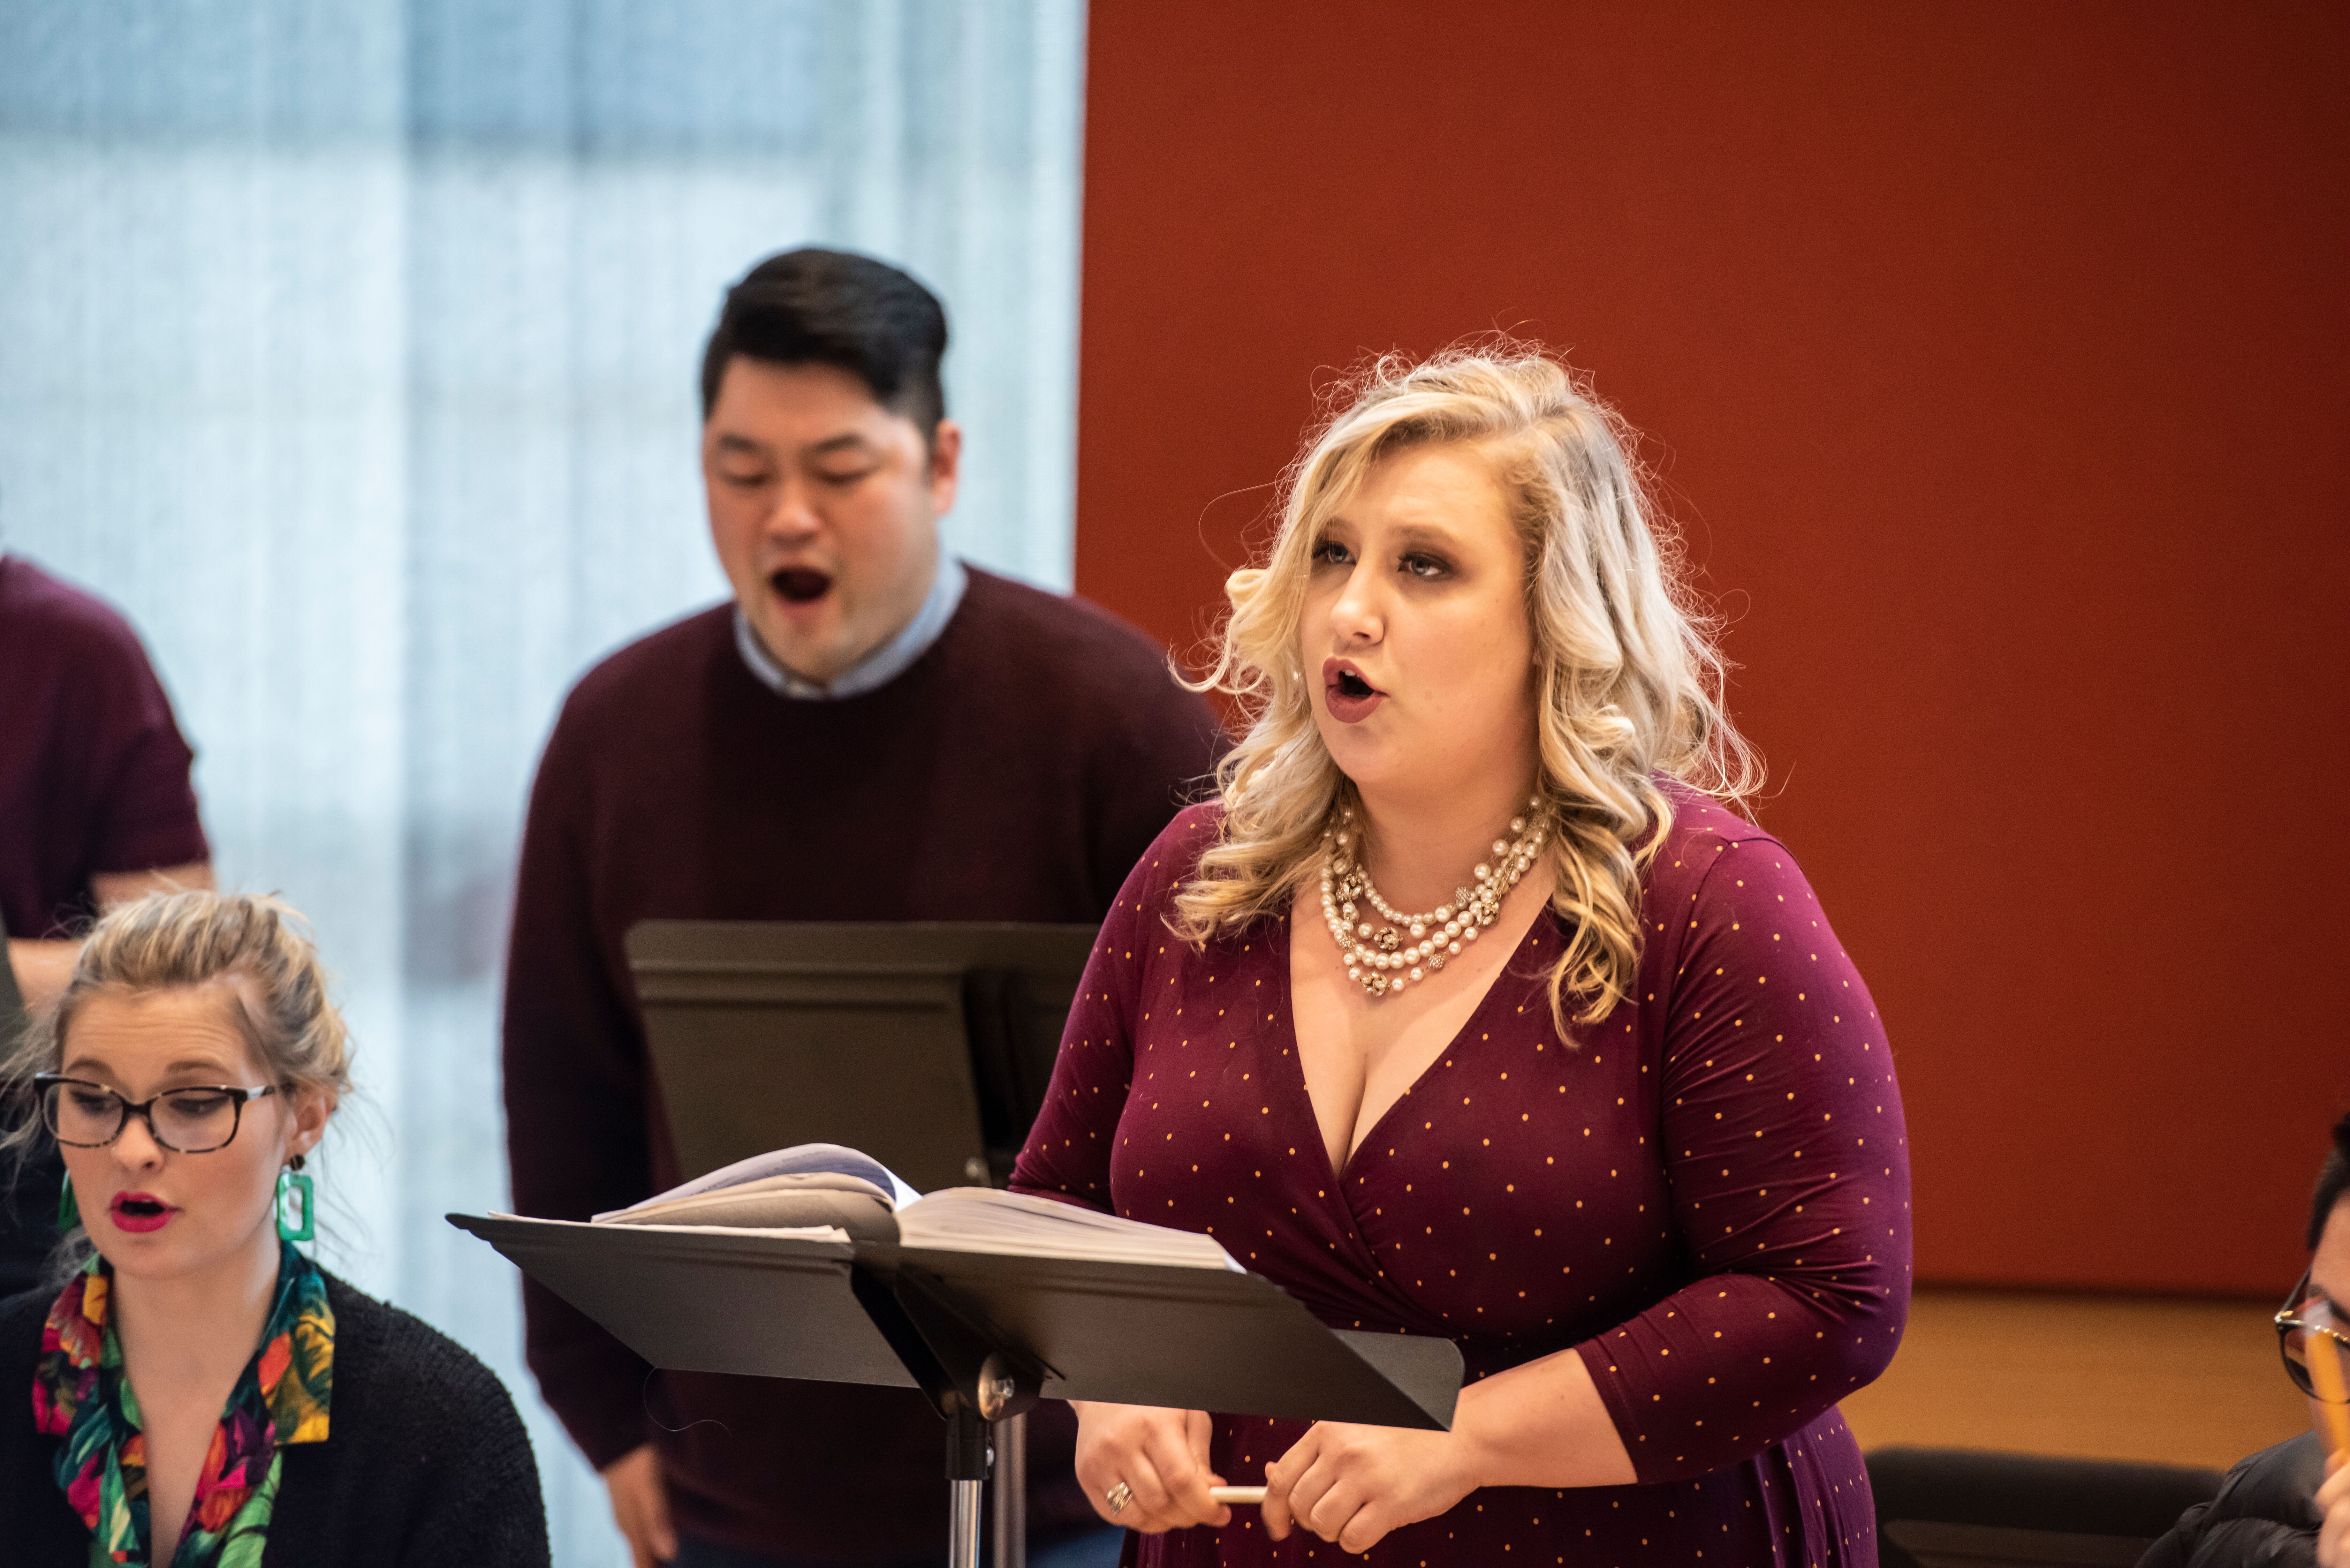 Whitney Robinson singing in rehearsal for an opera